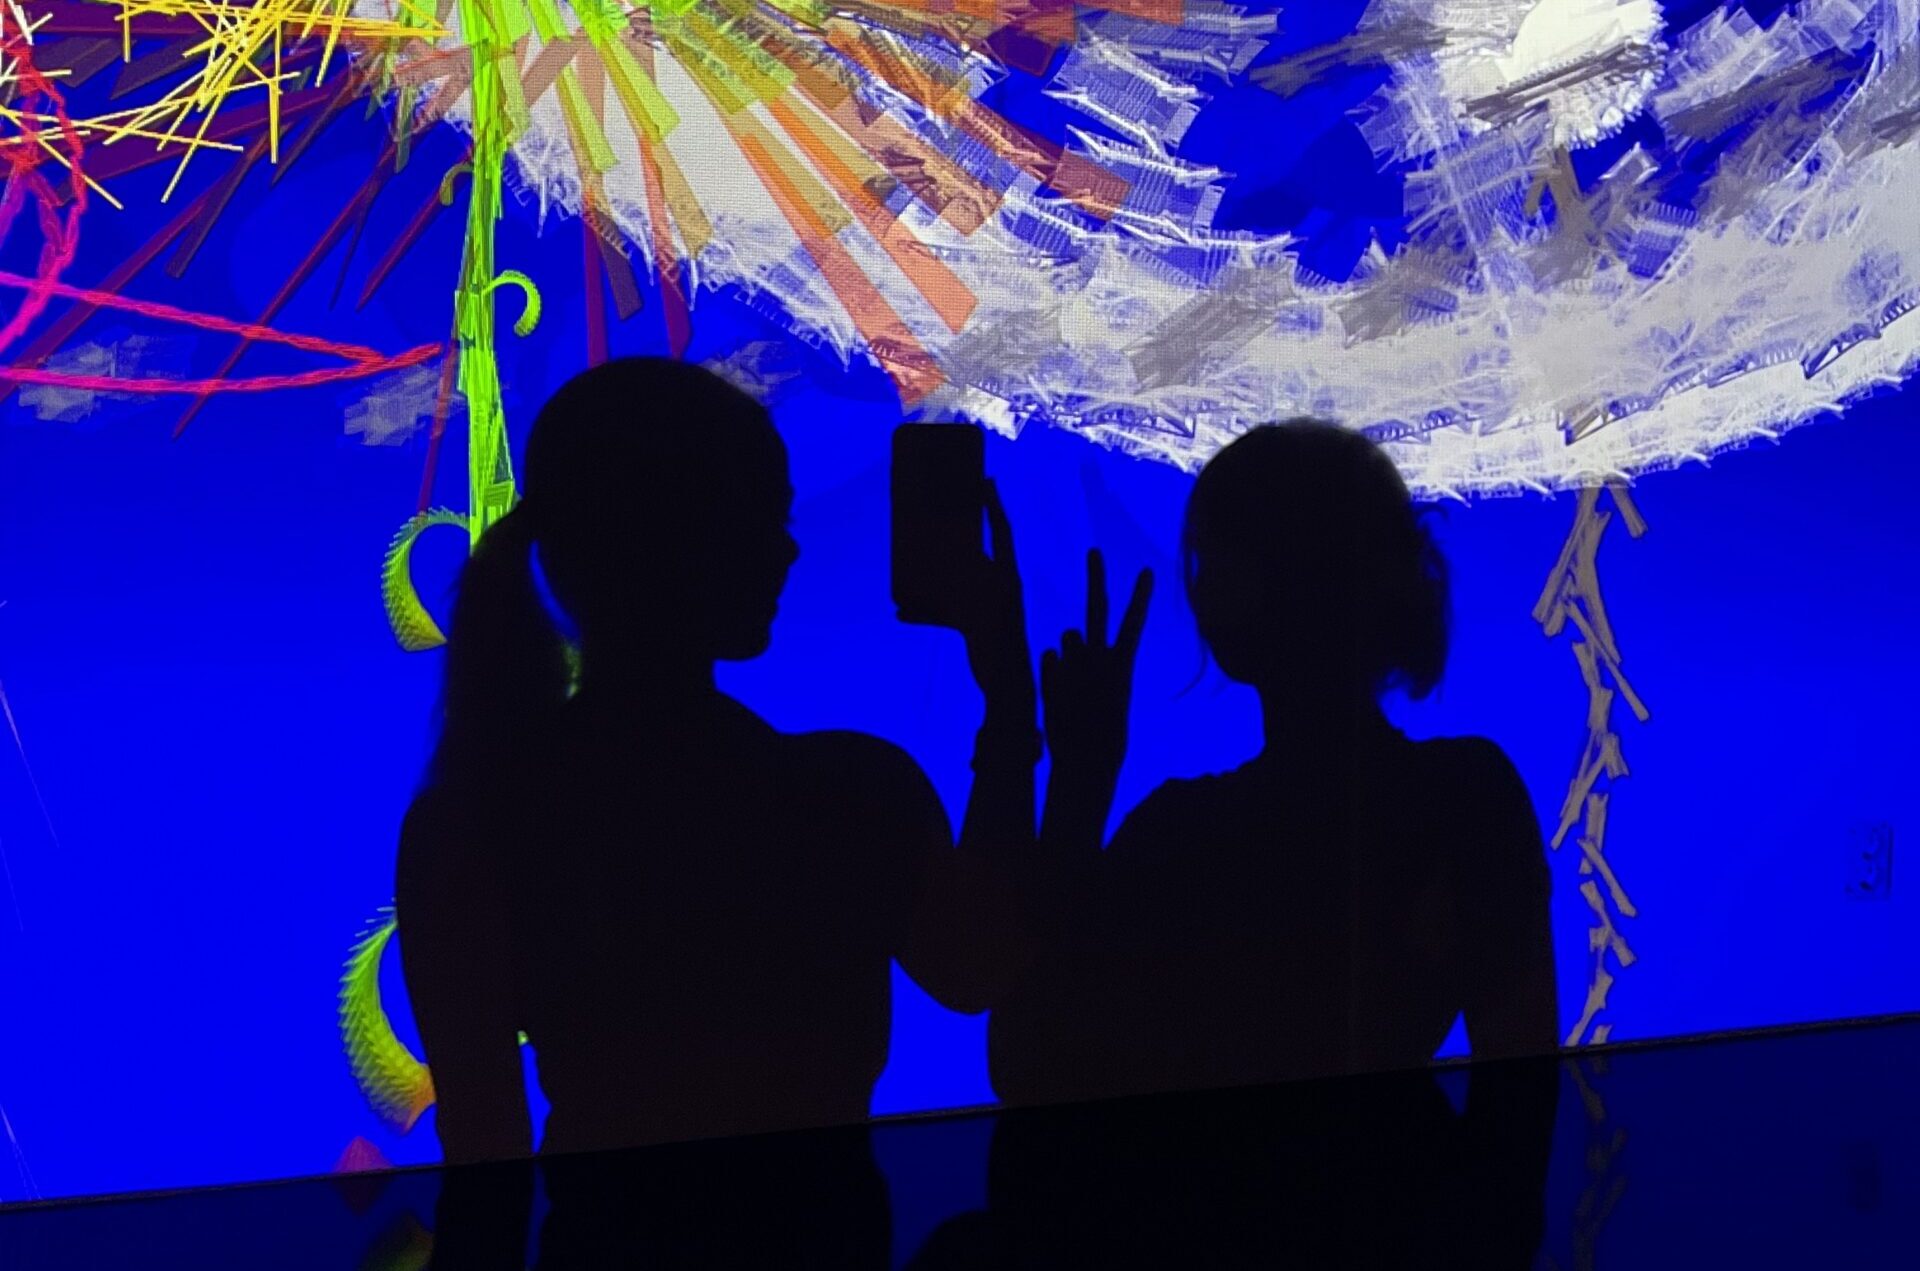 Two shadows against blue light show wall, one girl doing peace sign